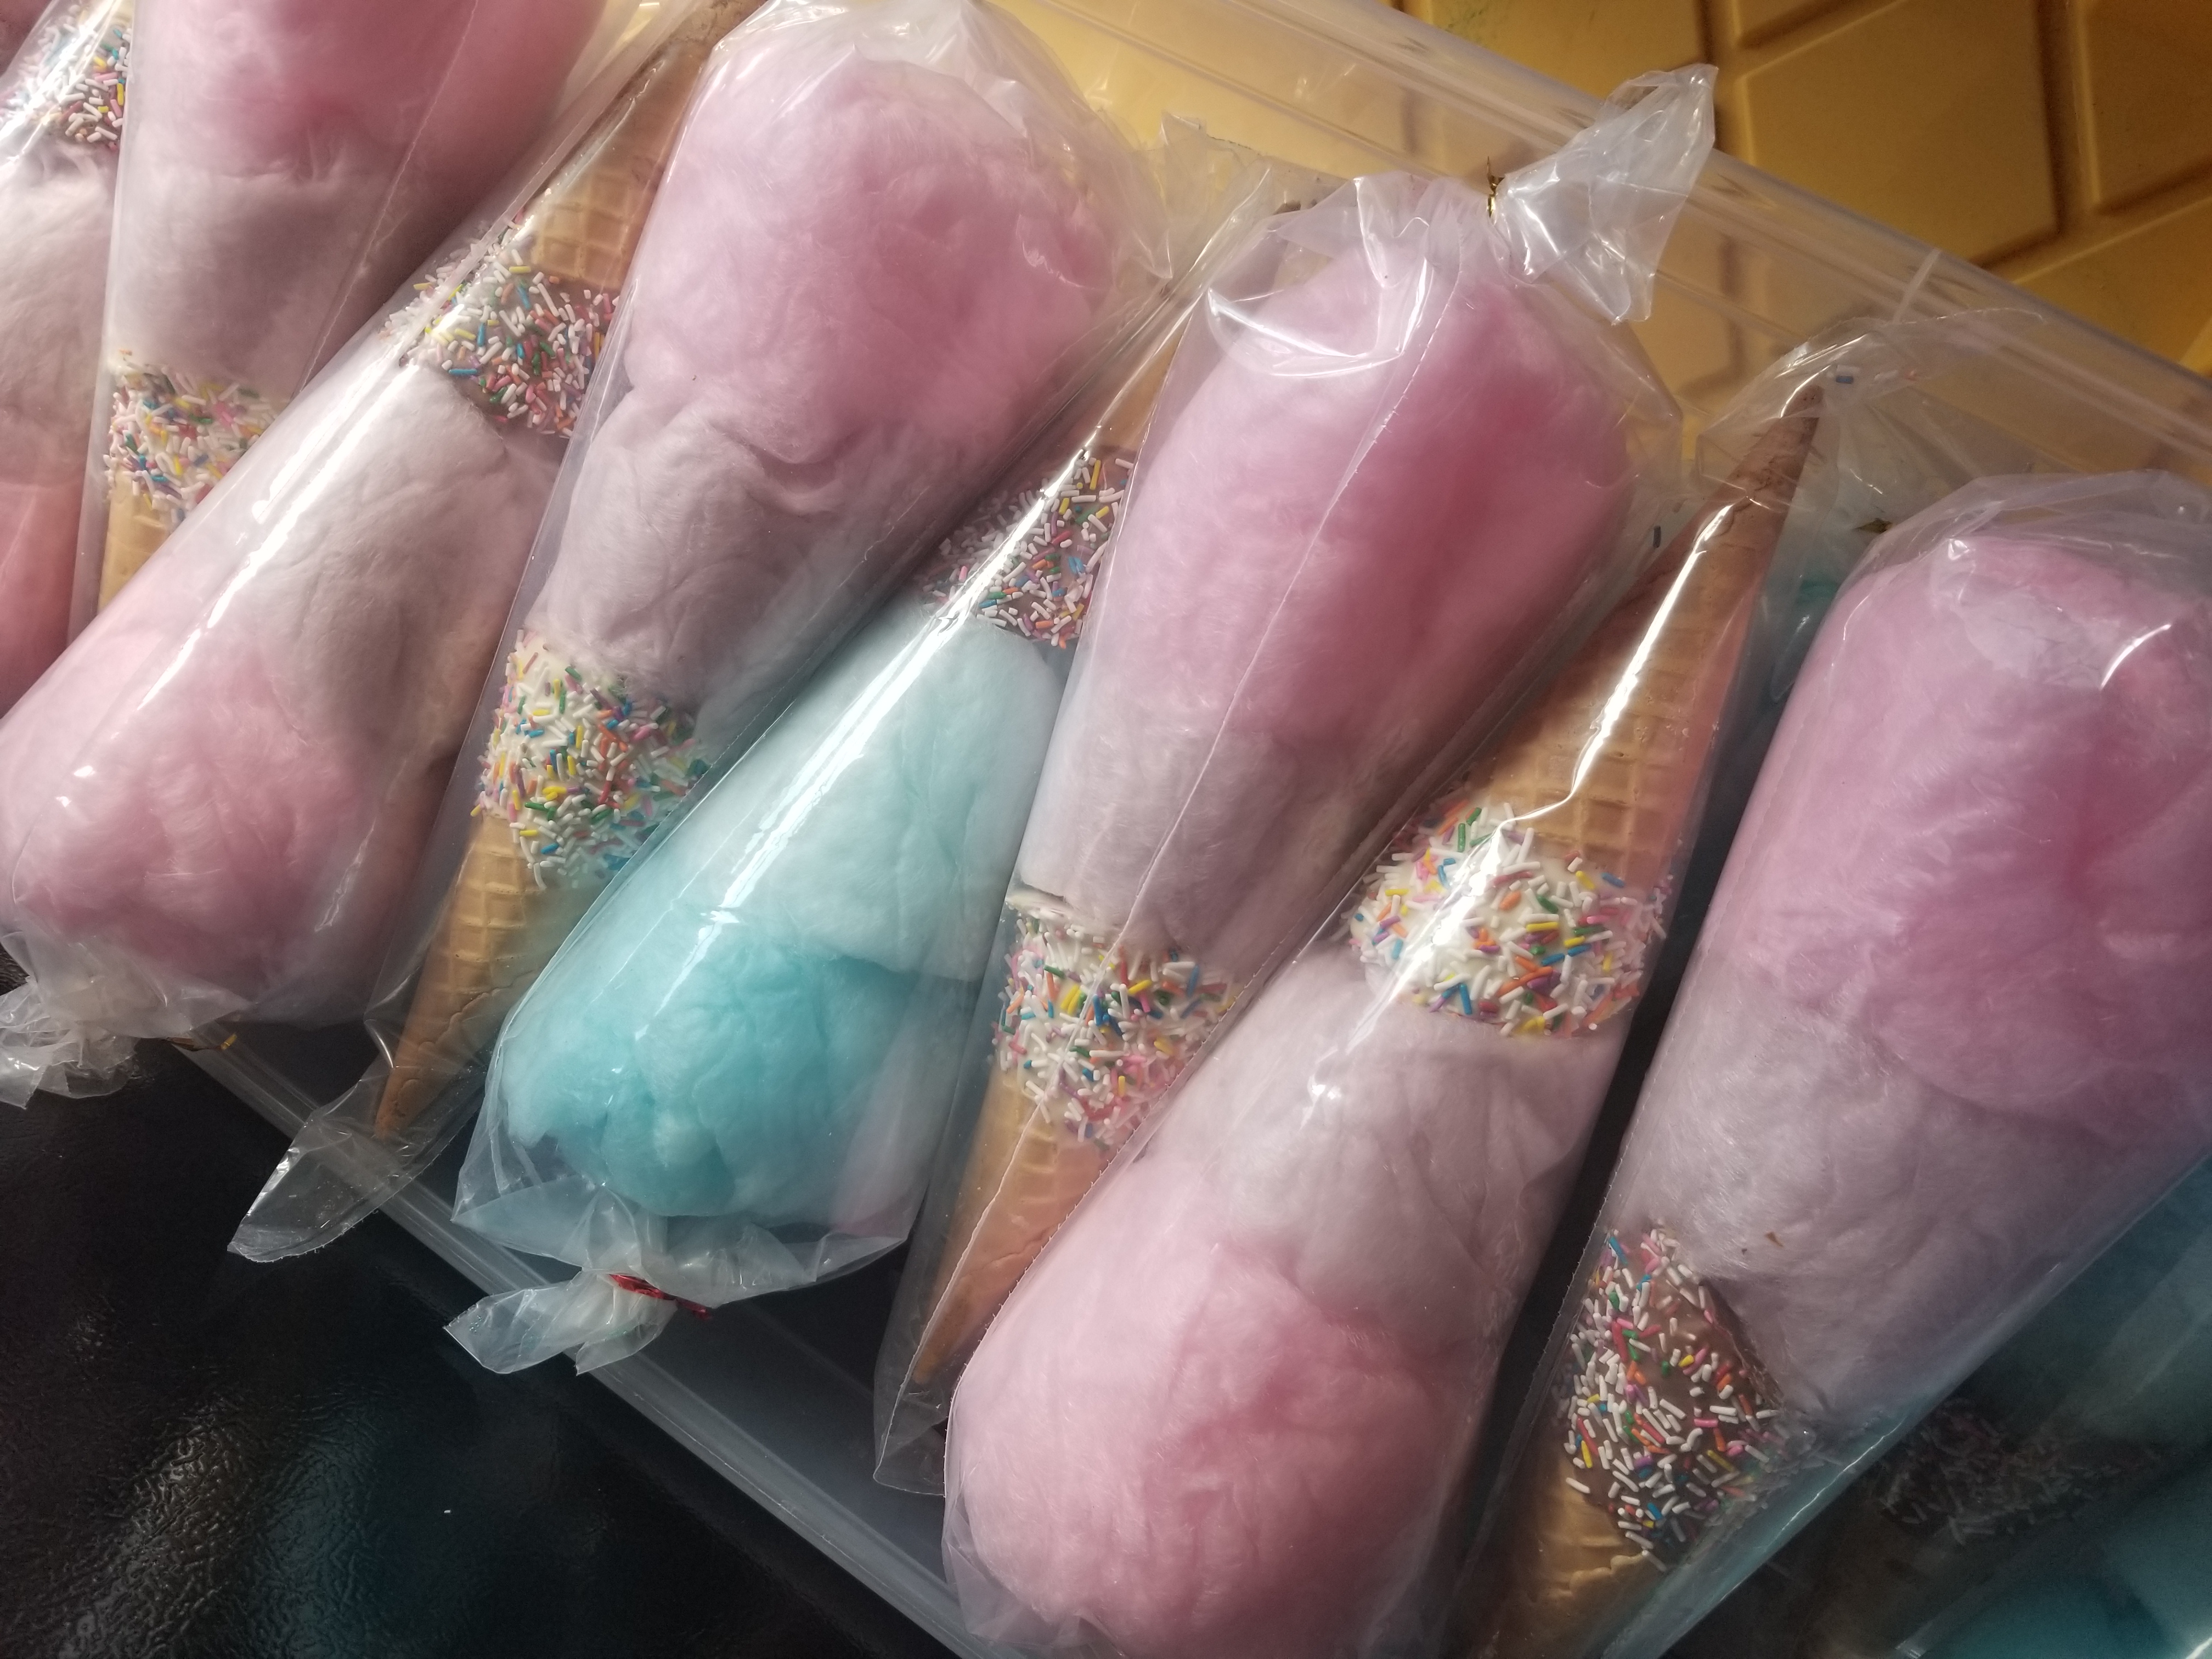 Cotton candy from Emma Dilemma Cotton Candy and Confections